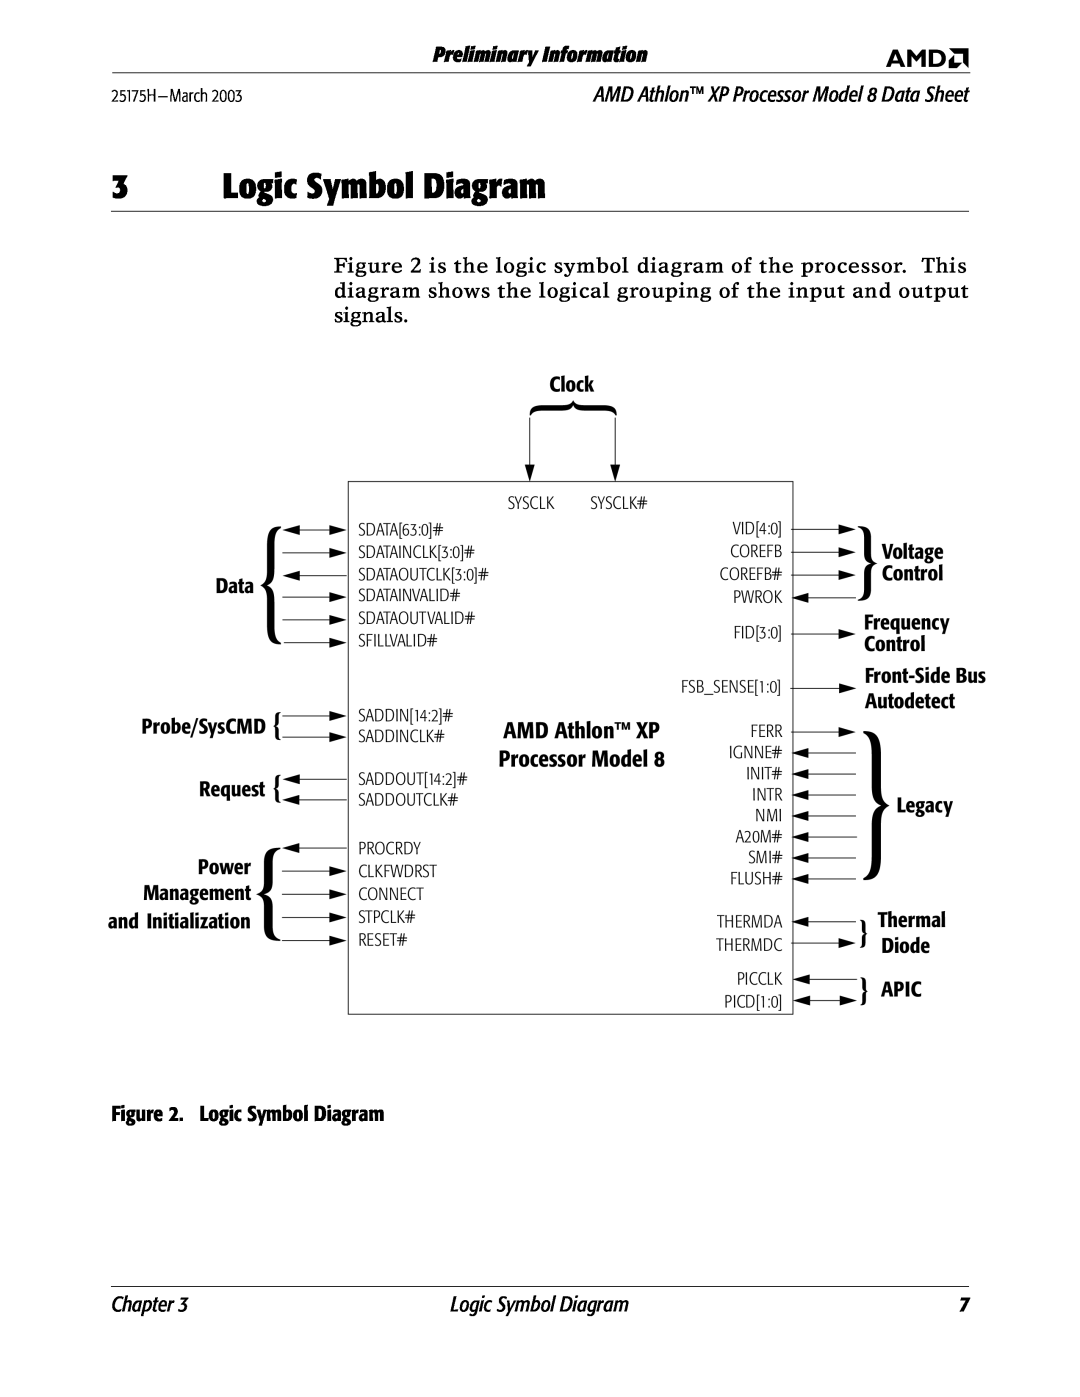 AMD 8 Logic Symbol Diagram, Clock, Data Probe/SysCMD Request Power Management and Initialization, Legacy, Diode, Chapter 